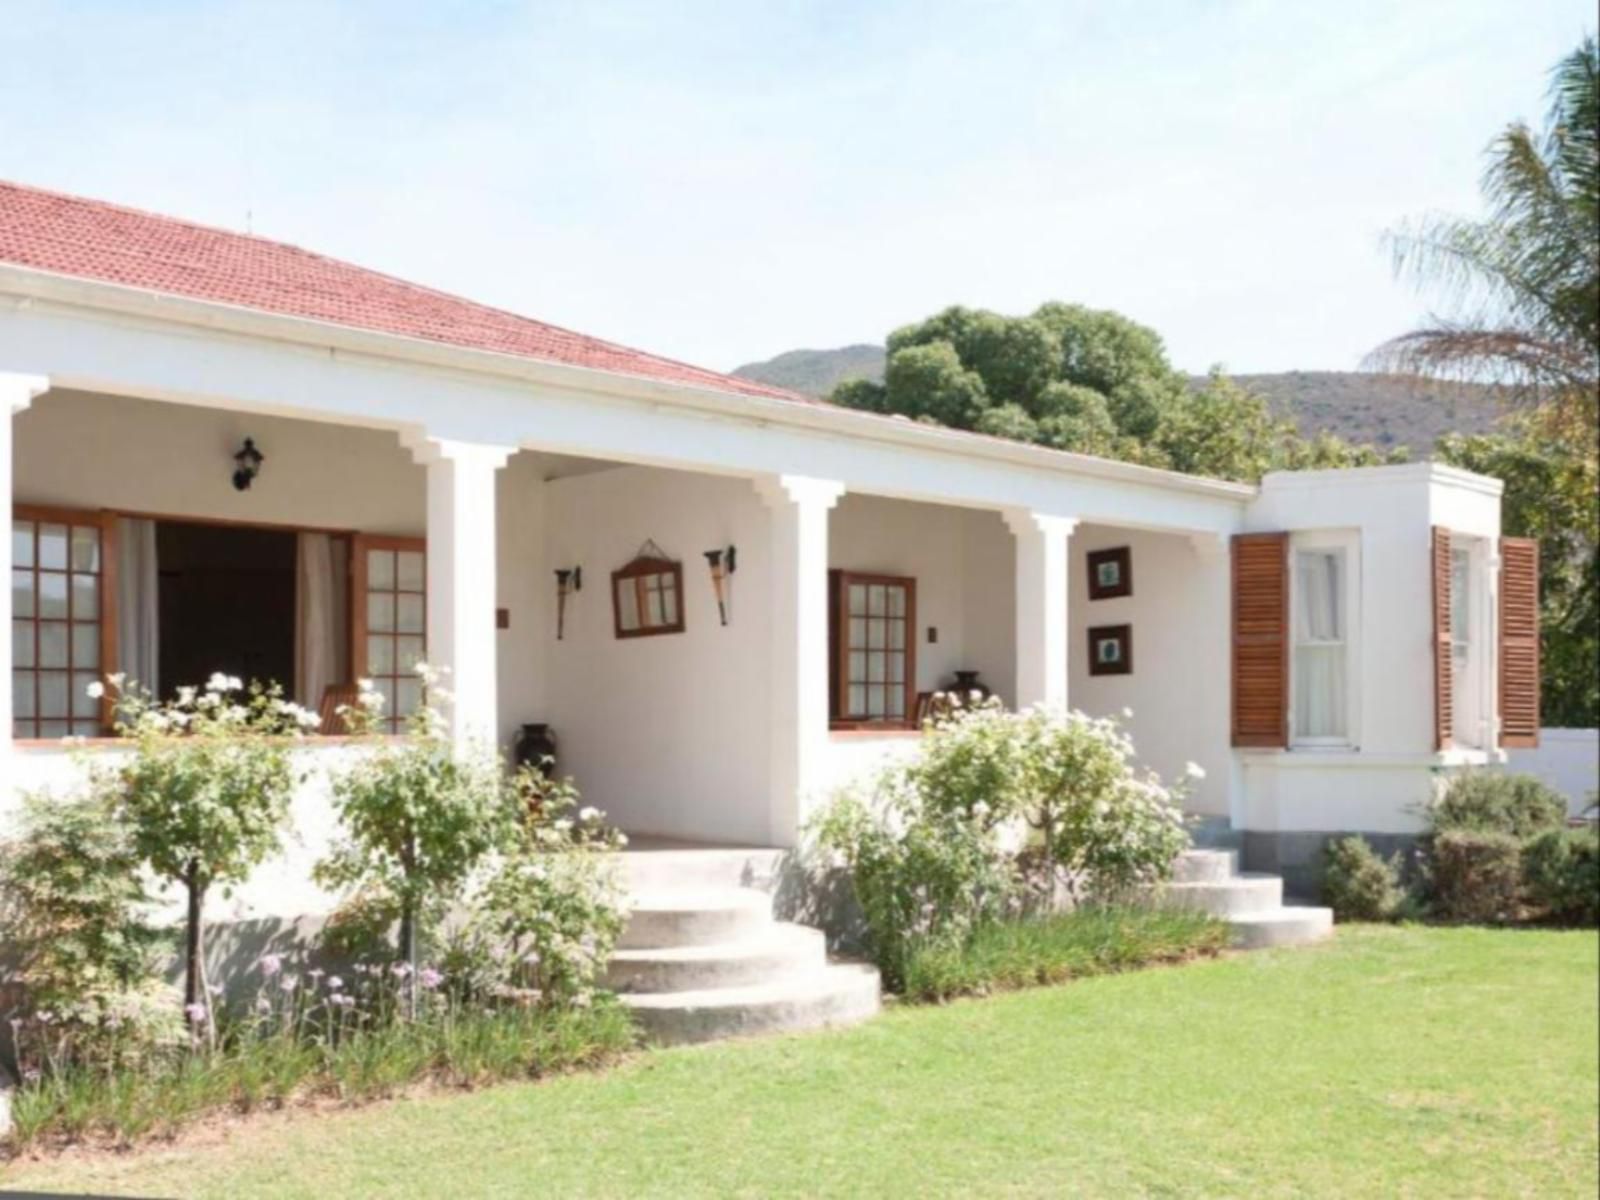 Oue Werf Country House Oudtshoorn Western Cape South Africa House, Building, Architecture